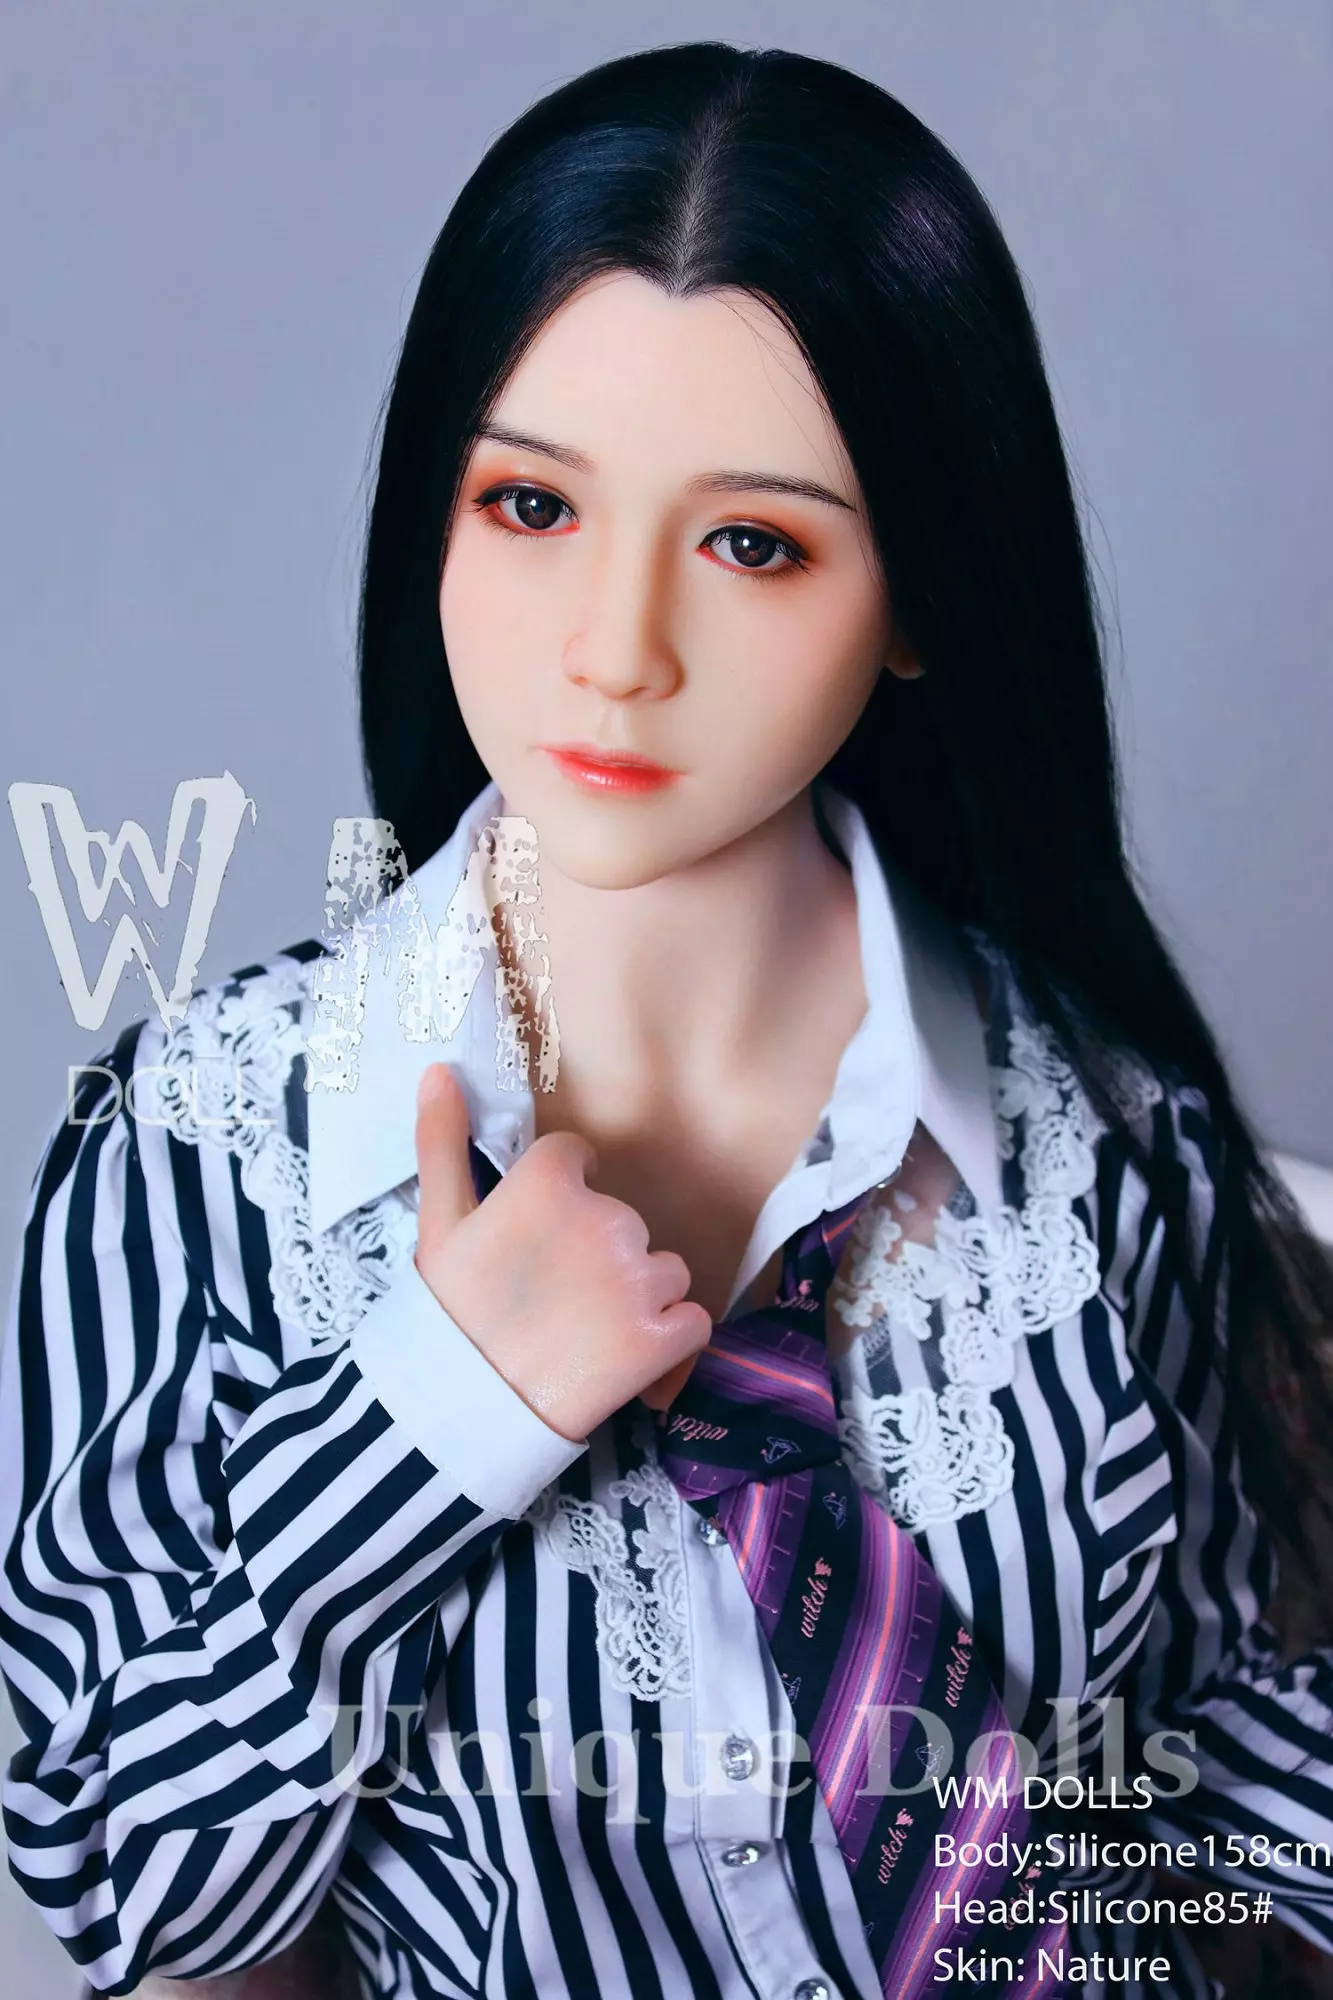 Angelkiss Doll full silicone 158cm doll with S85 Head